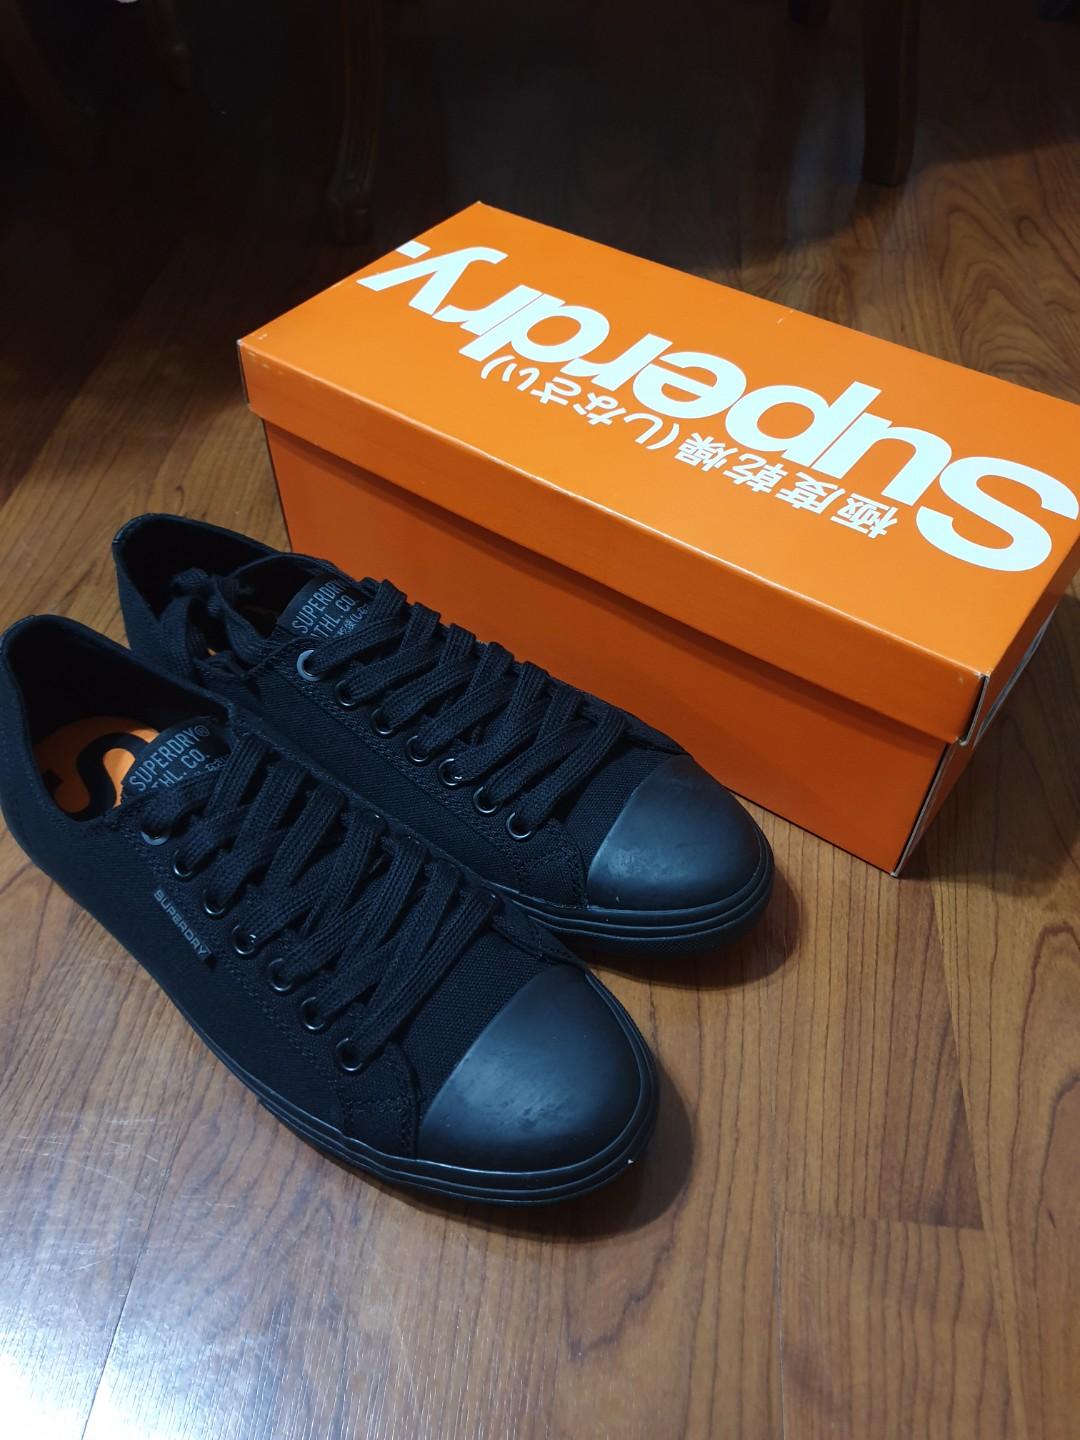 New Authentic Superdry Canvas Shoes 